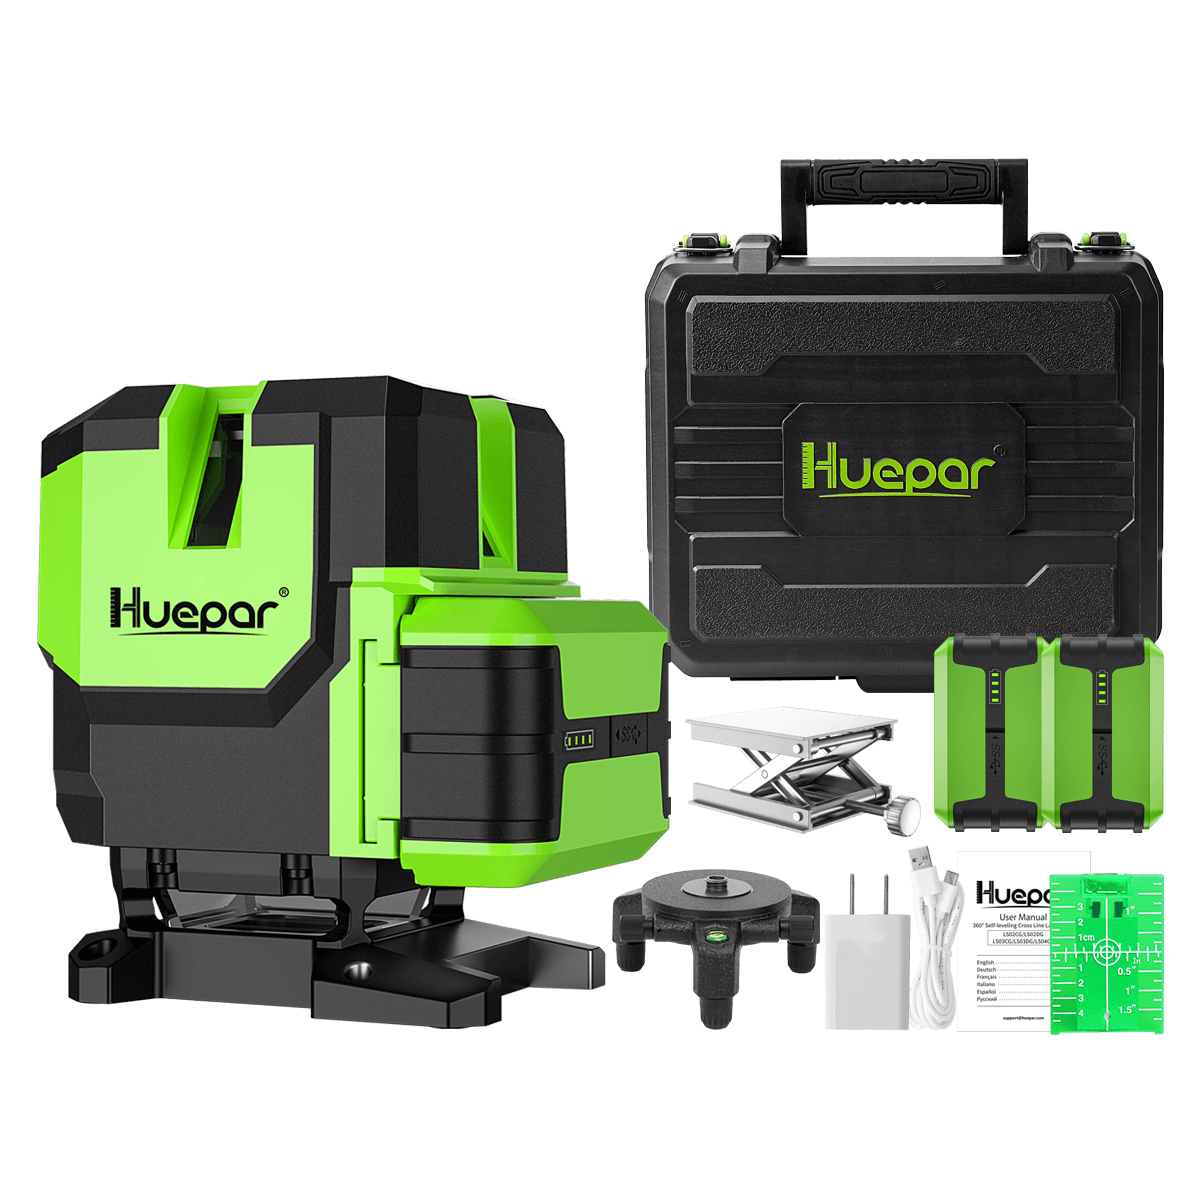 HUEPAR LS41G - Green Cross Line Self-leveling Multi-Line Laser Level-Four Vertical and One 360° Horizontal Lines with Plumb Dot